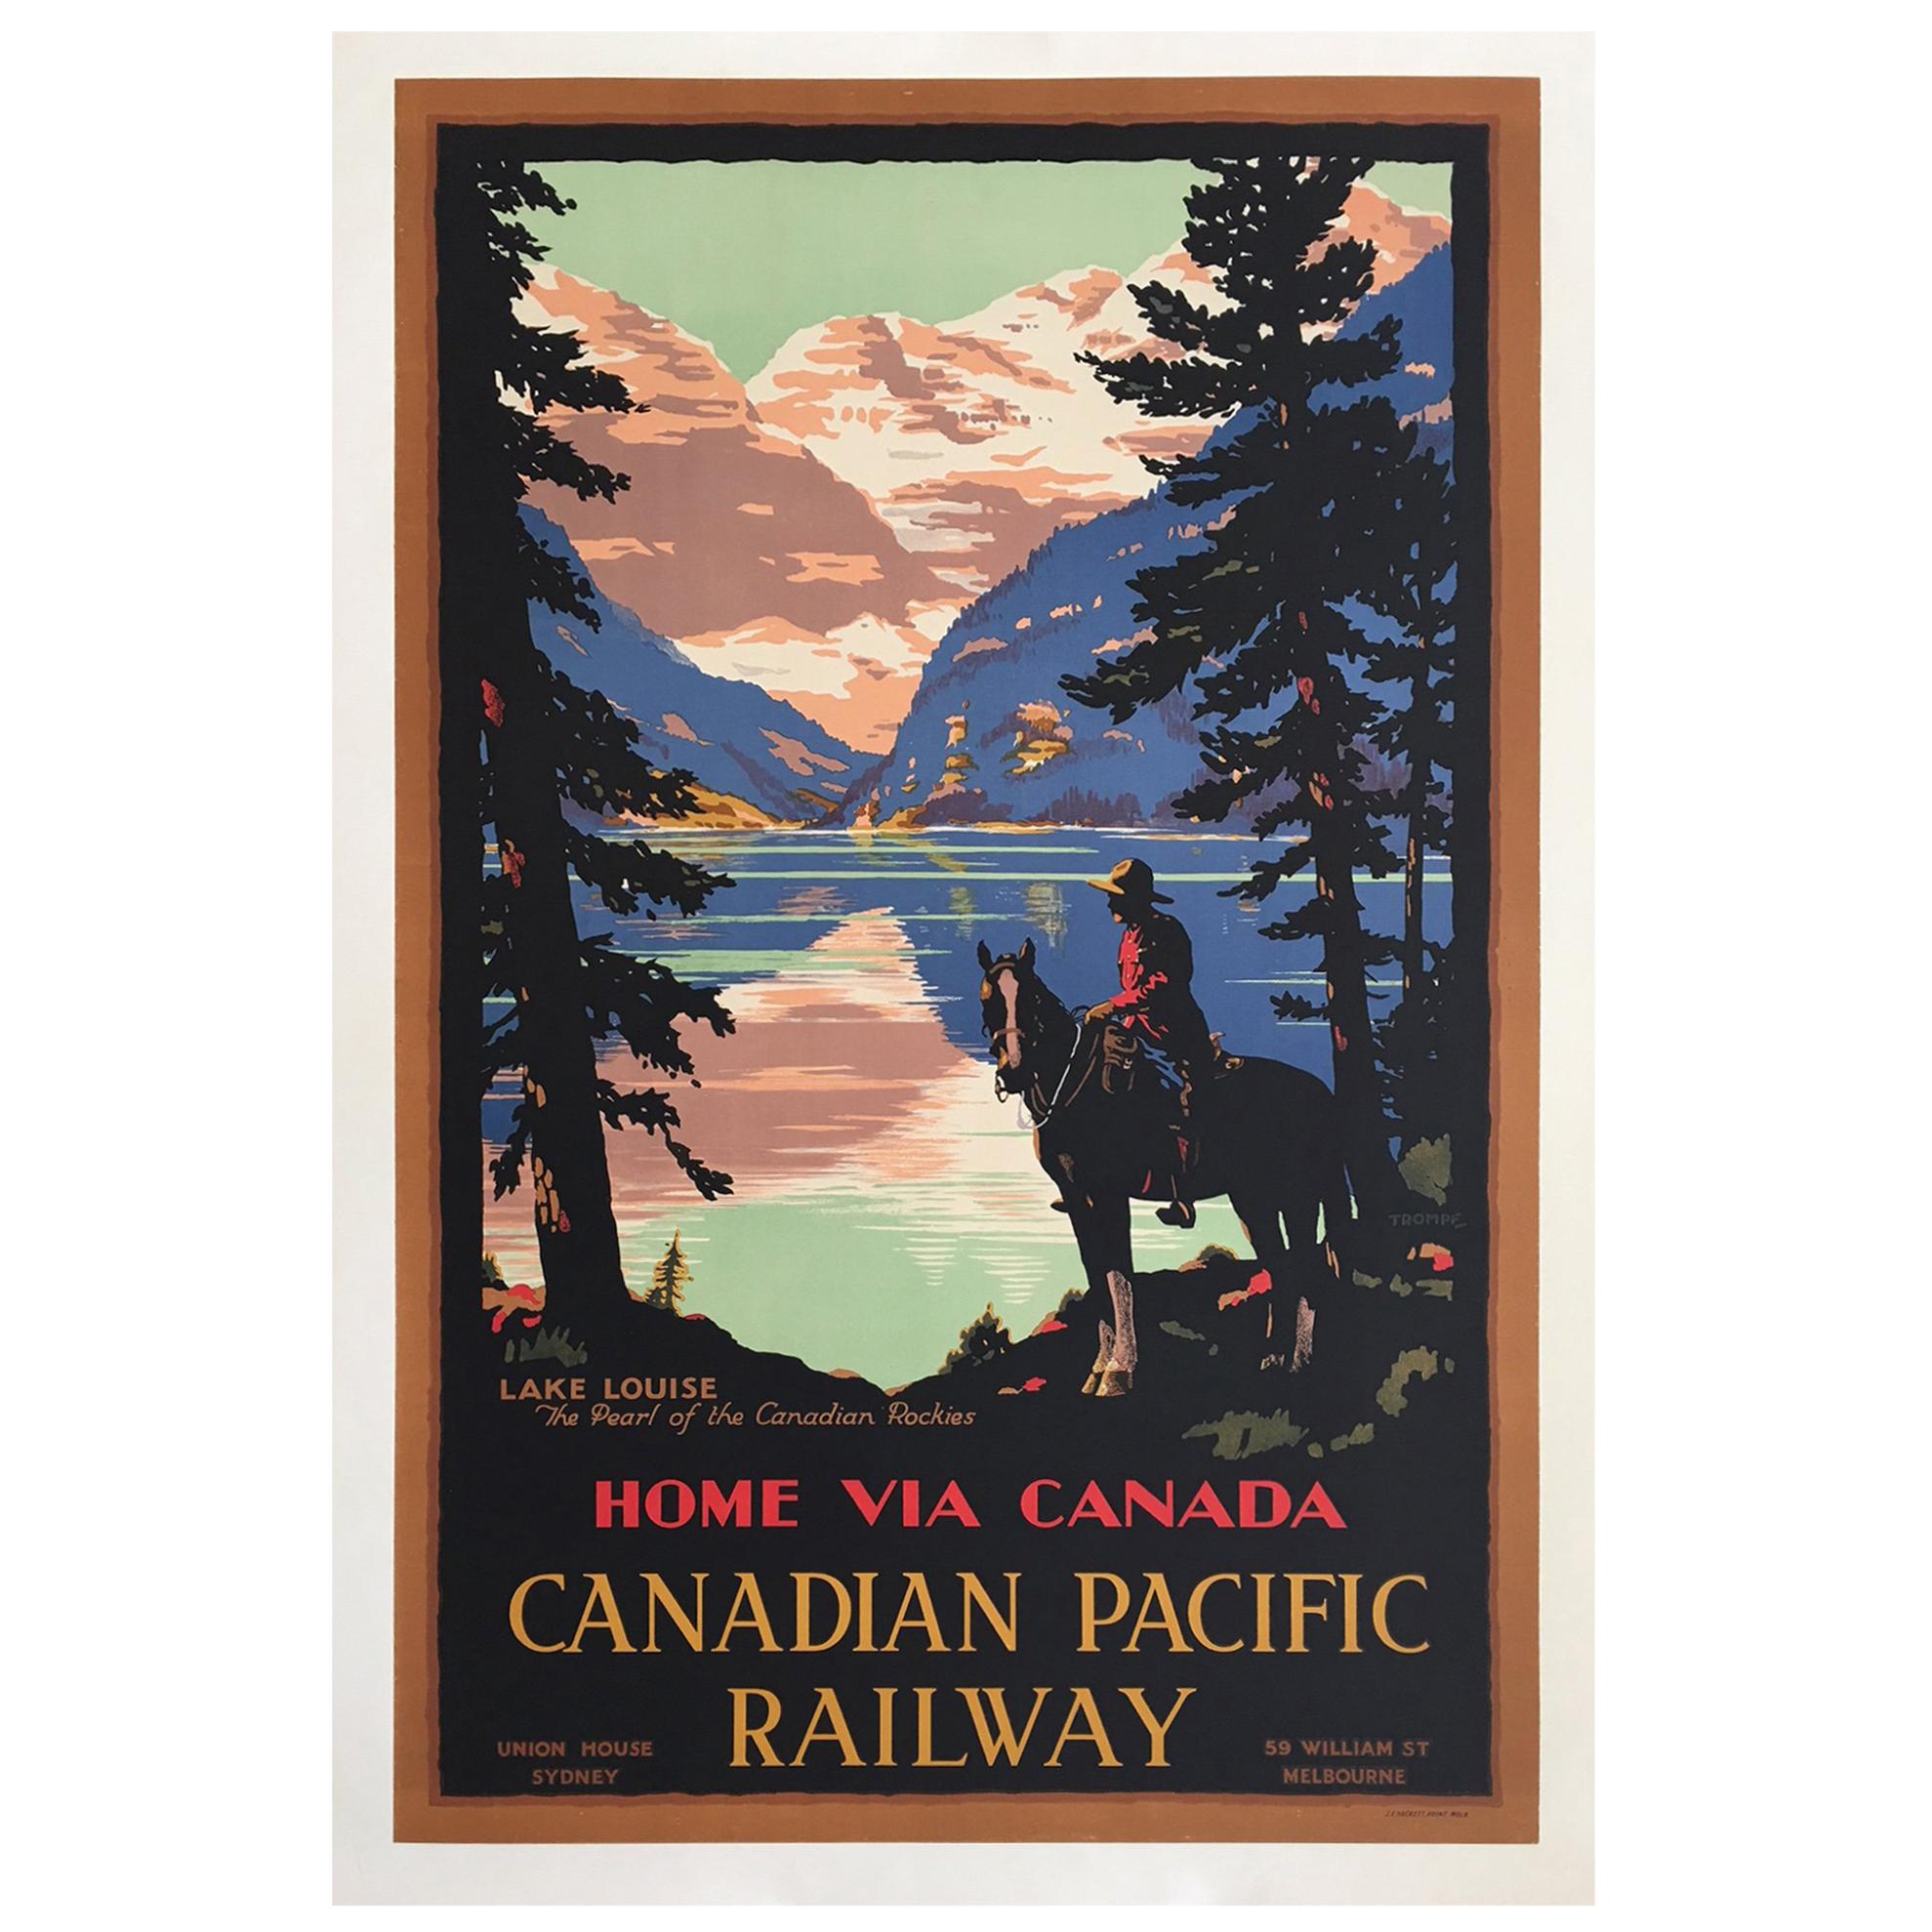 Home Via Canada Canadian Pacific, Original Vintage Poster by Trompf, 1930s